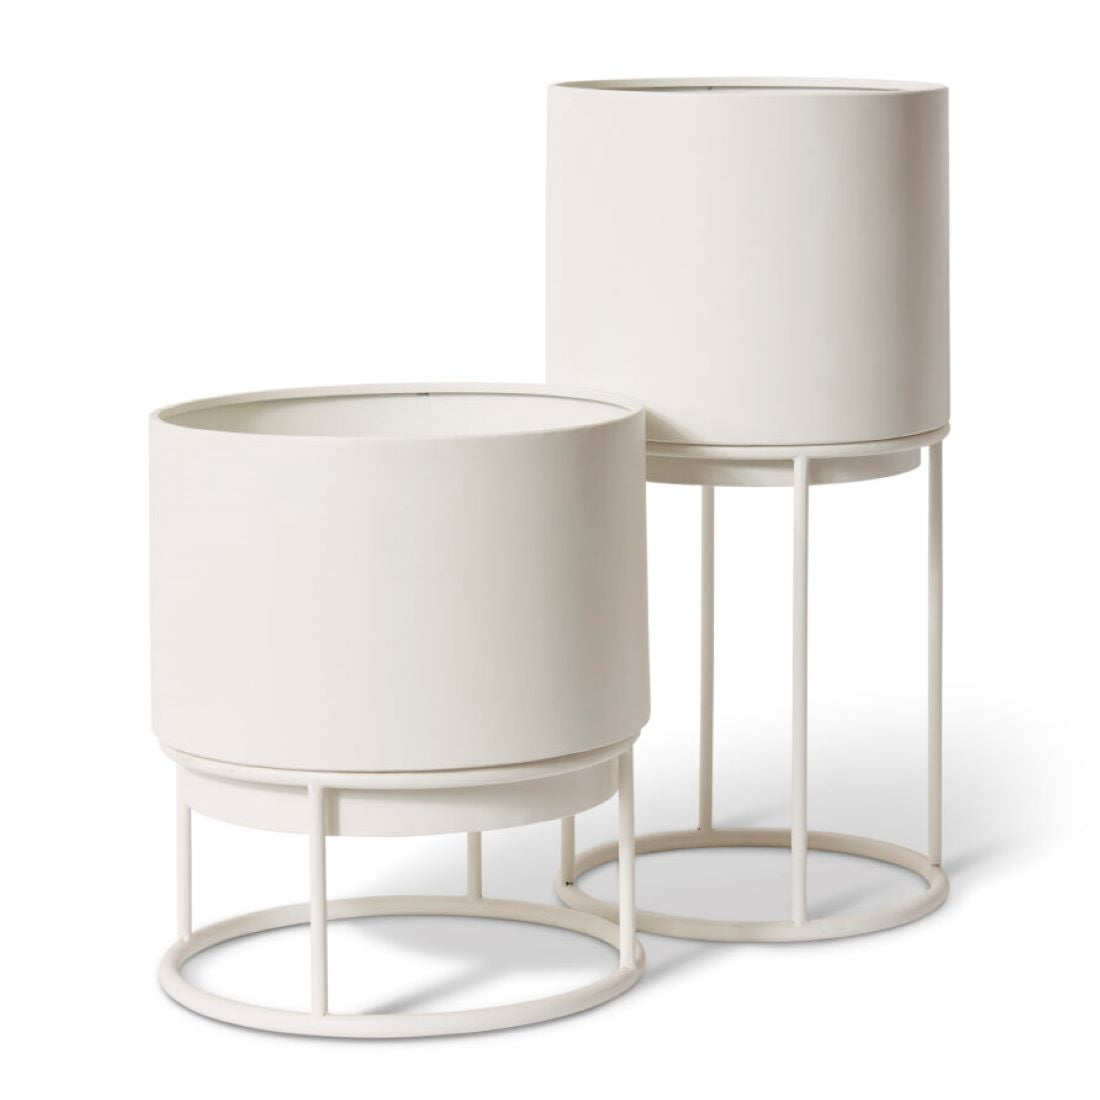 Gunner Planter With Stand White Tall 280mm - Gro Urban Oasis